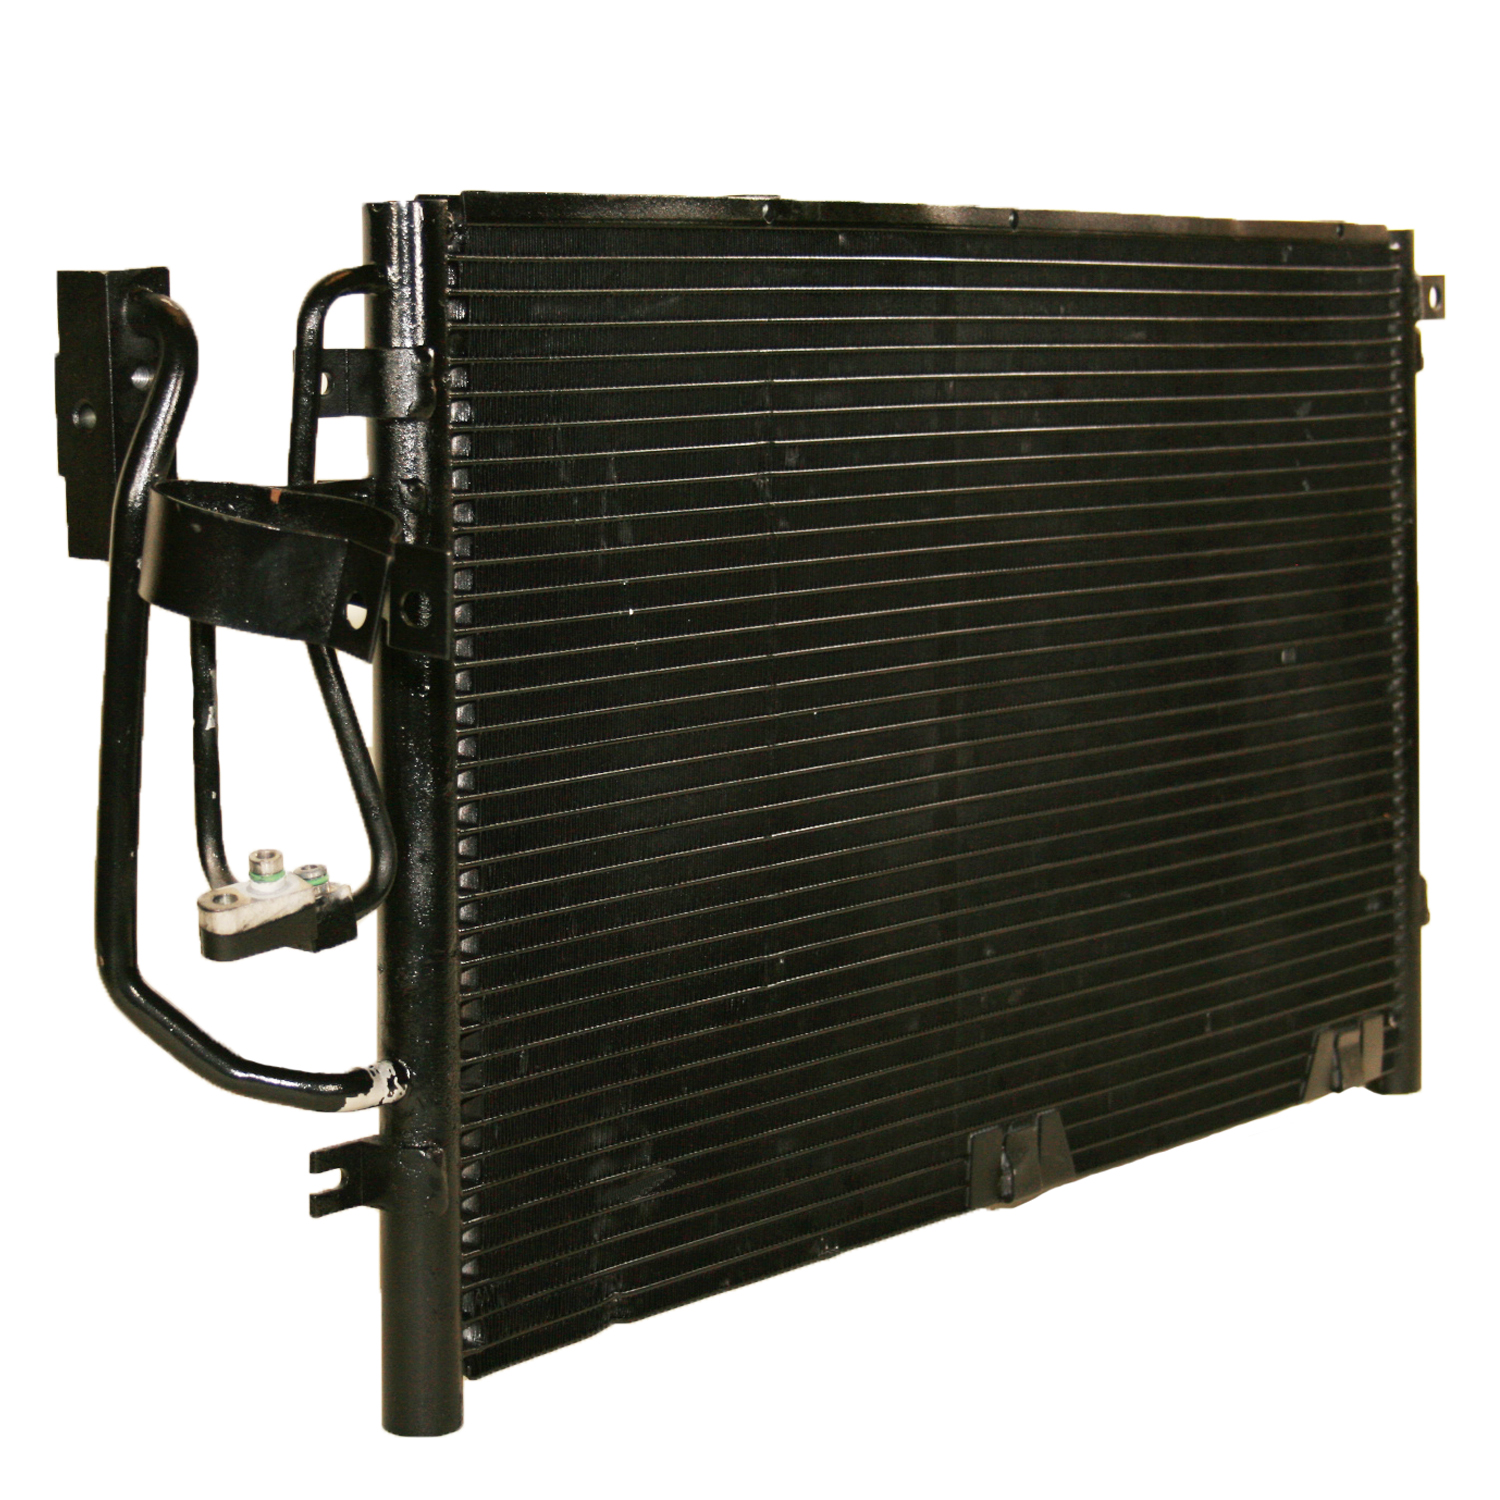 TCW Condenser 44-3051 New Product Image field_60b6a13a6e67c